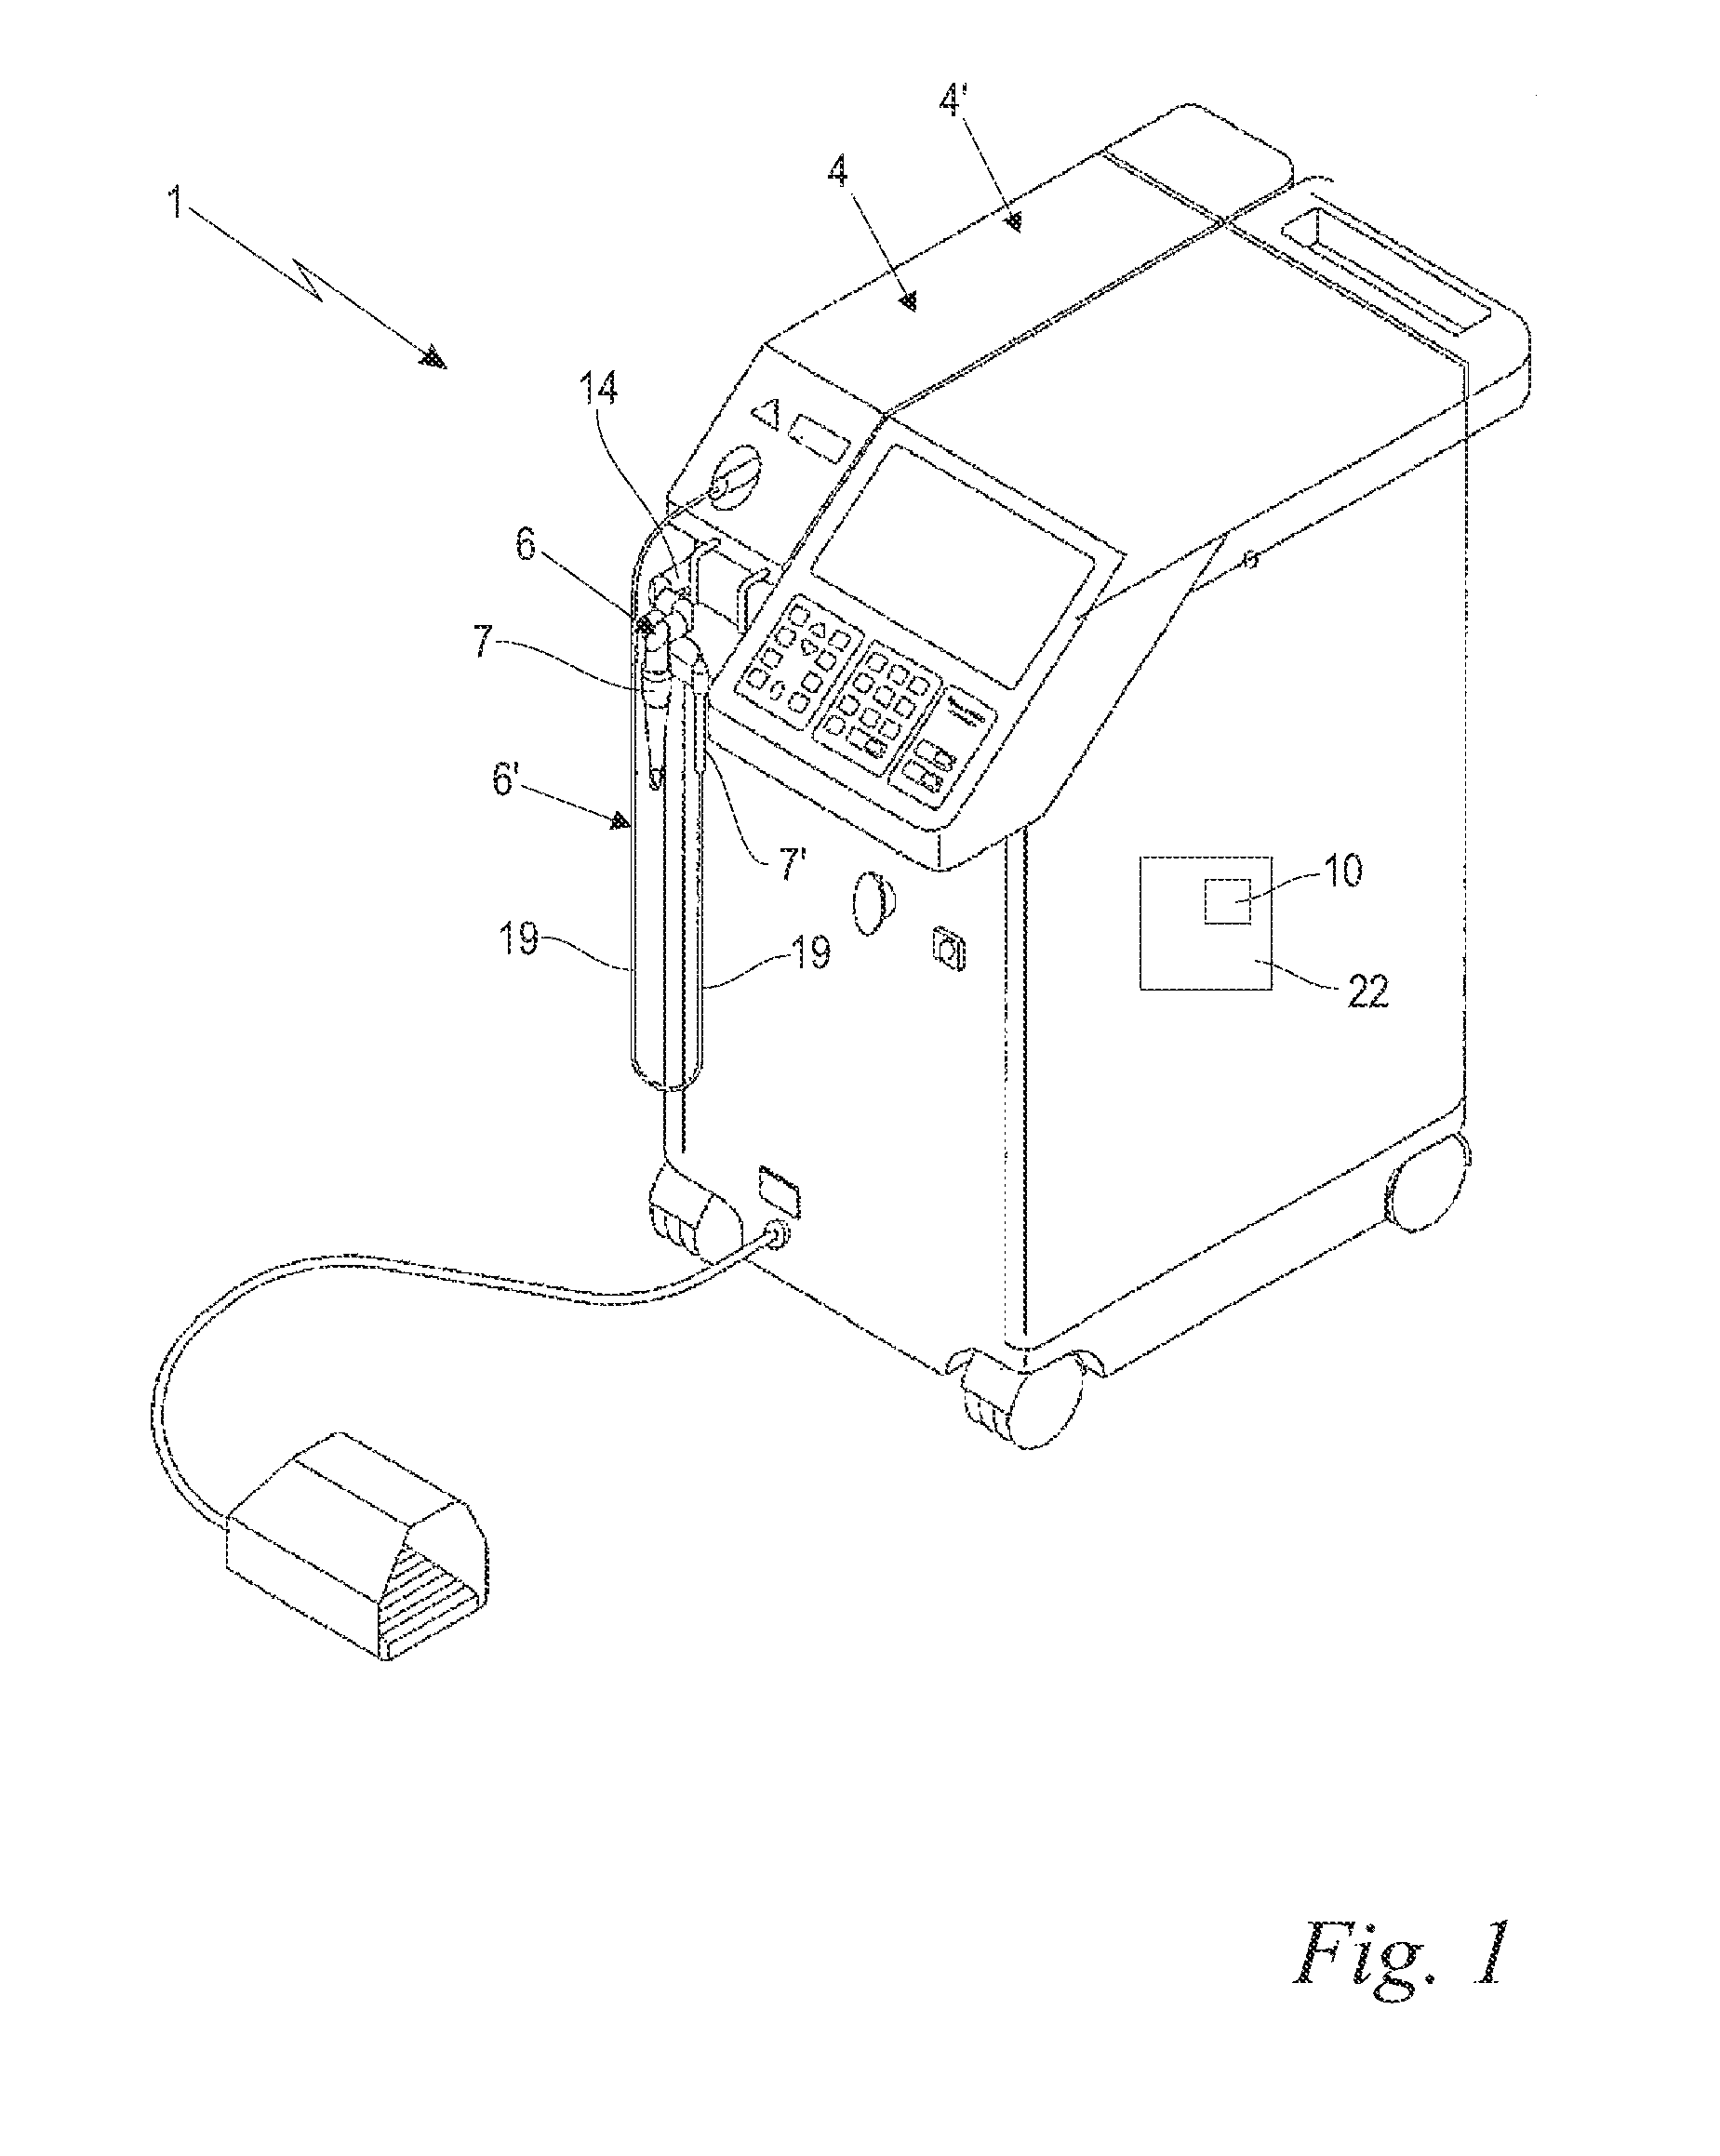 Laser system and method for operating the laser system